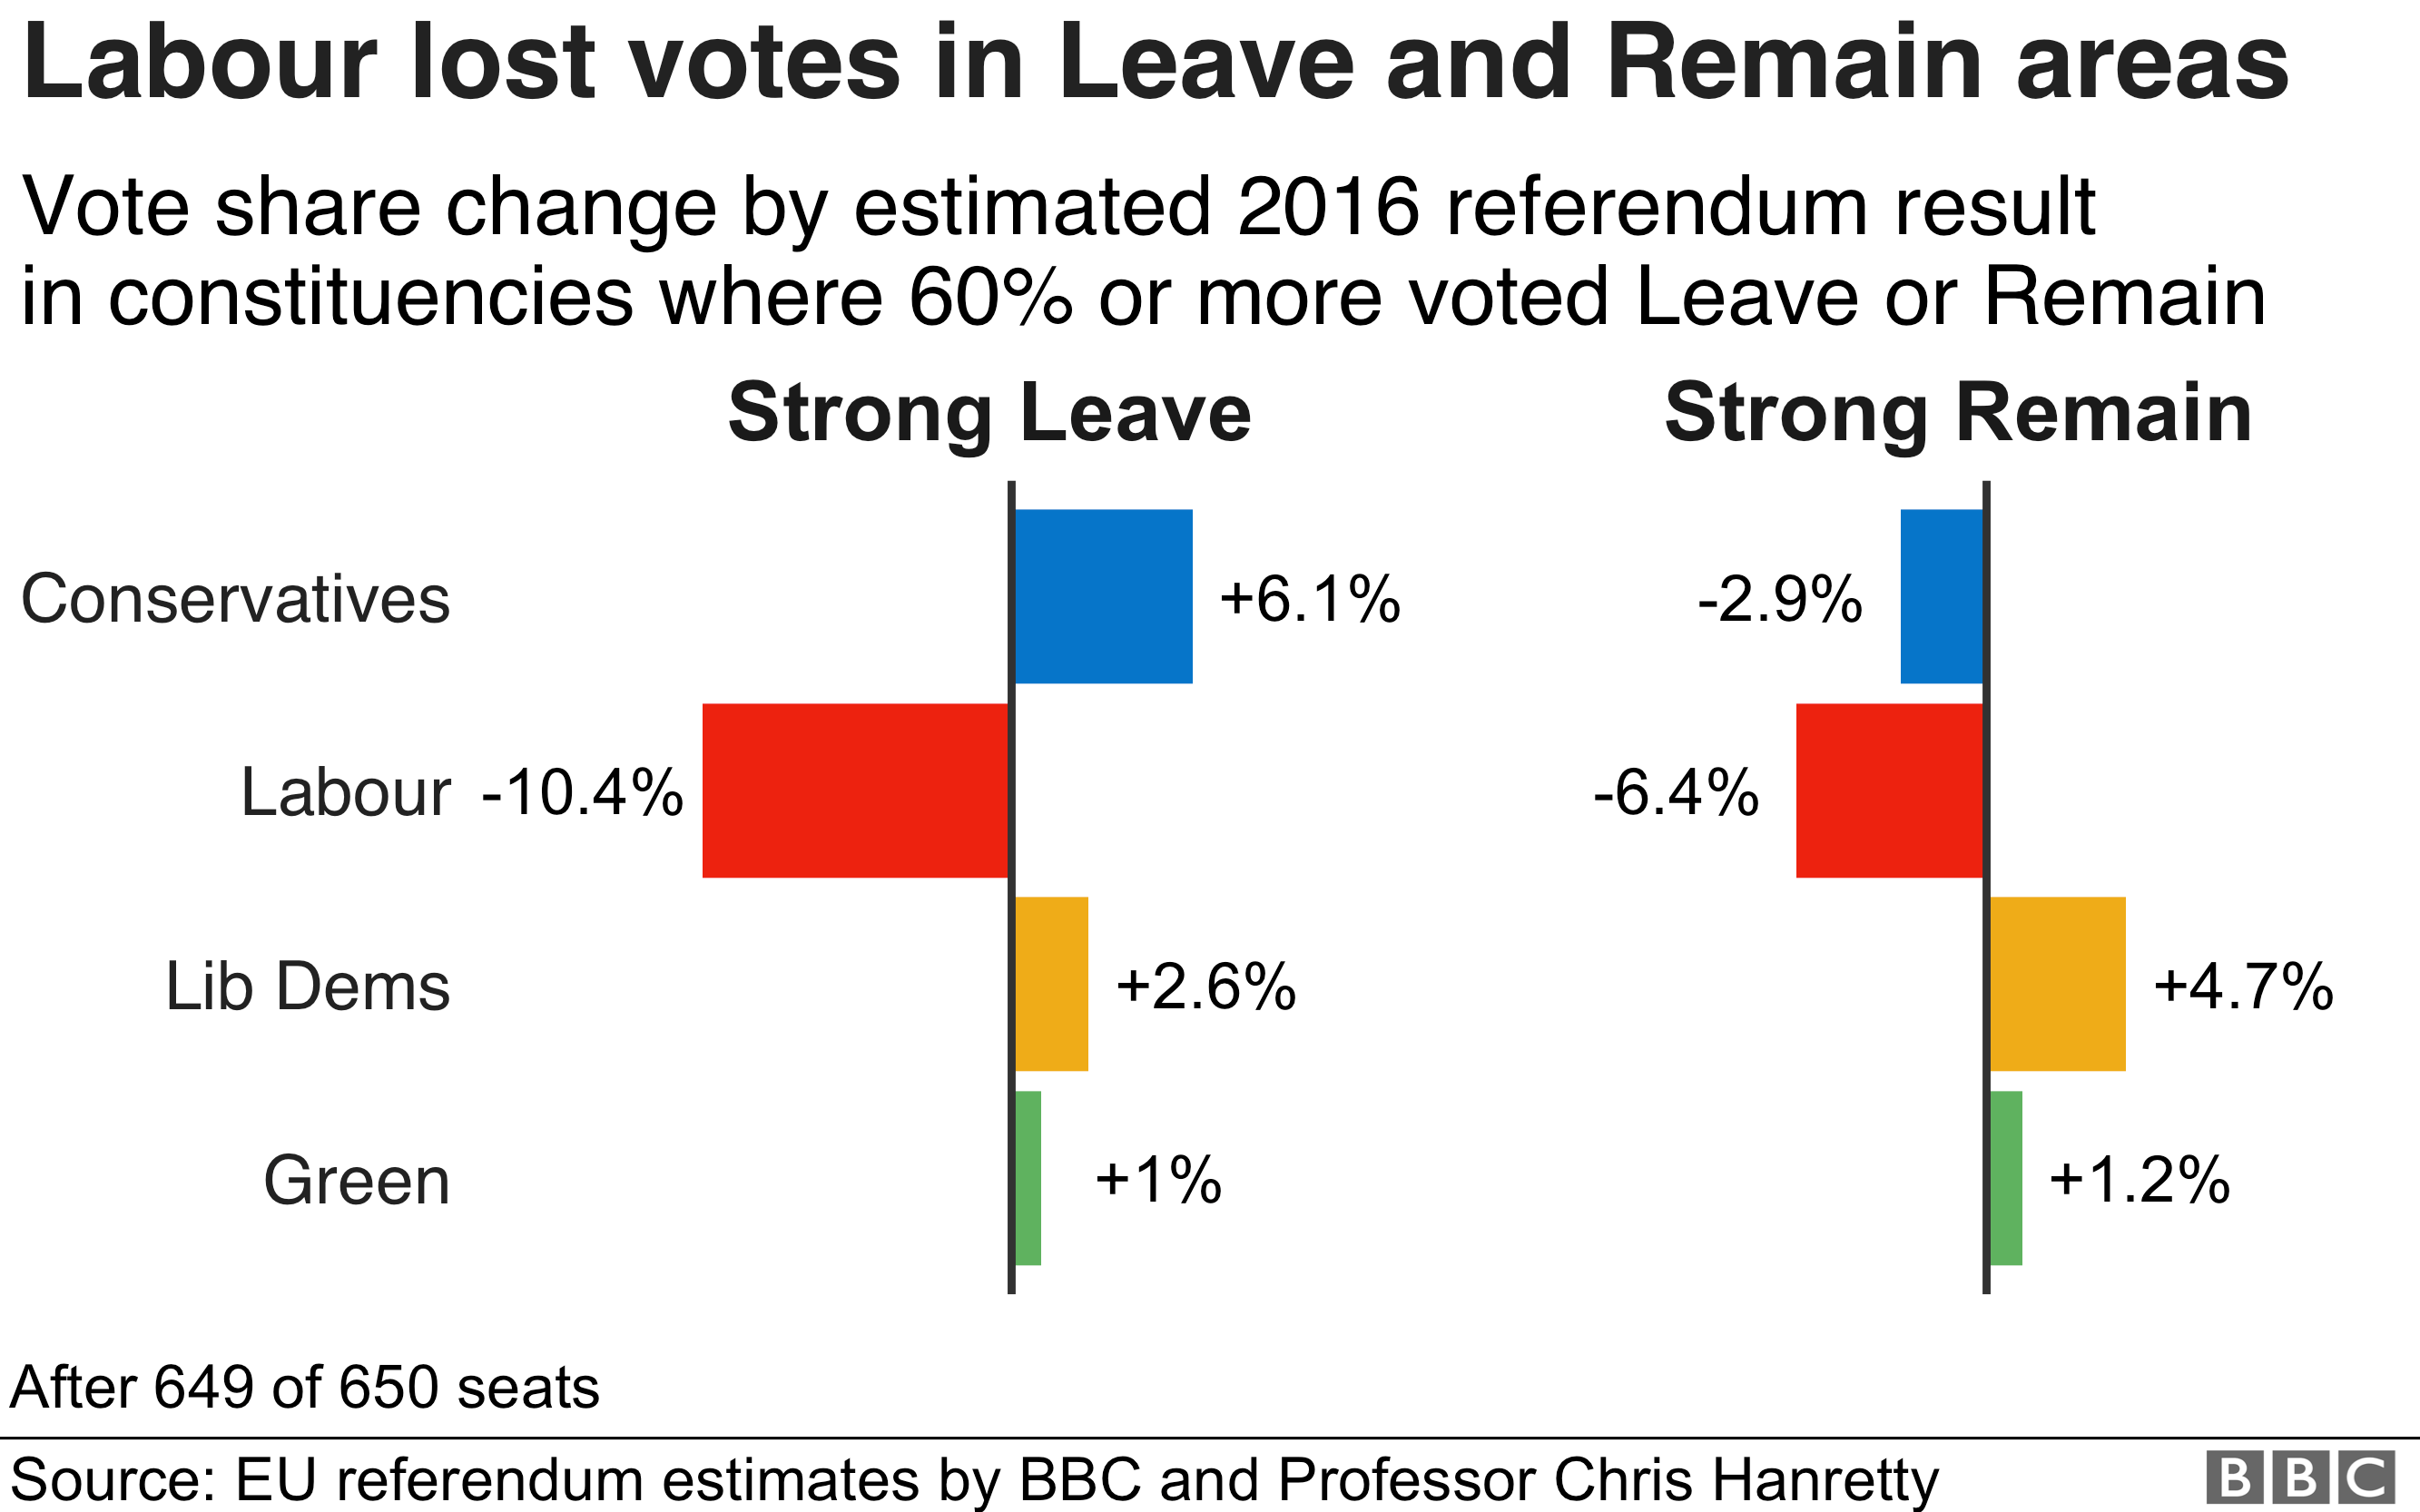 How the parties' share changed in strong Leave and strong Remain areas.